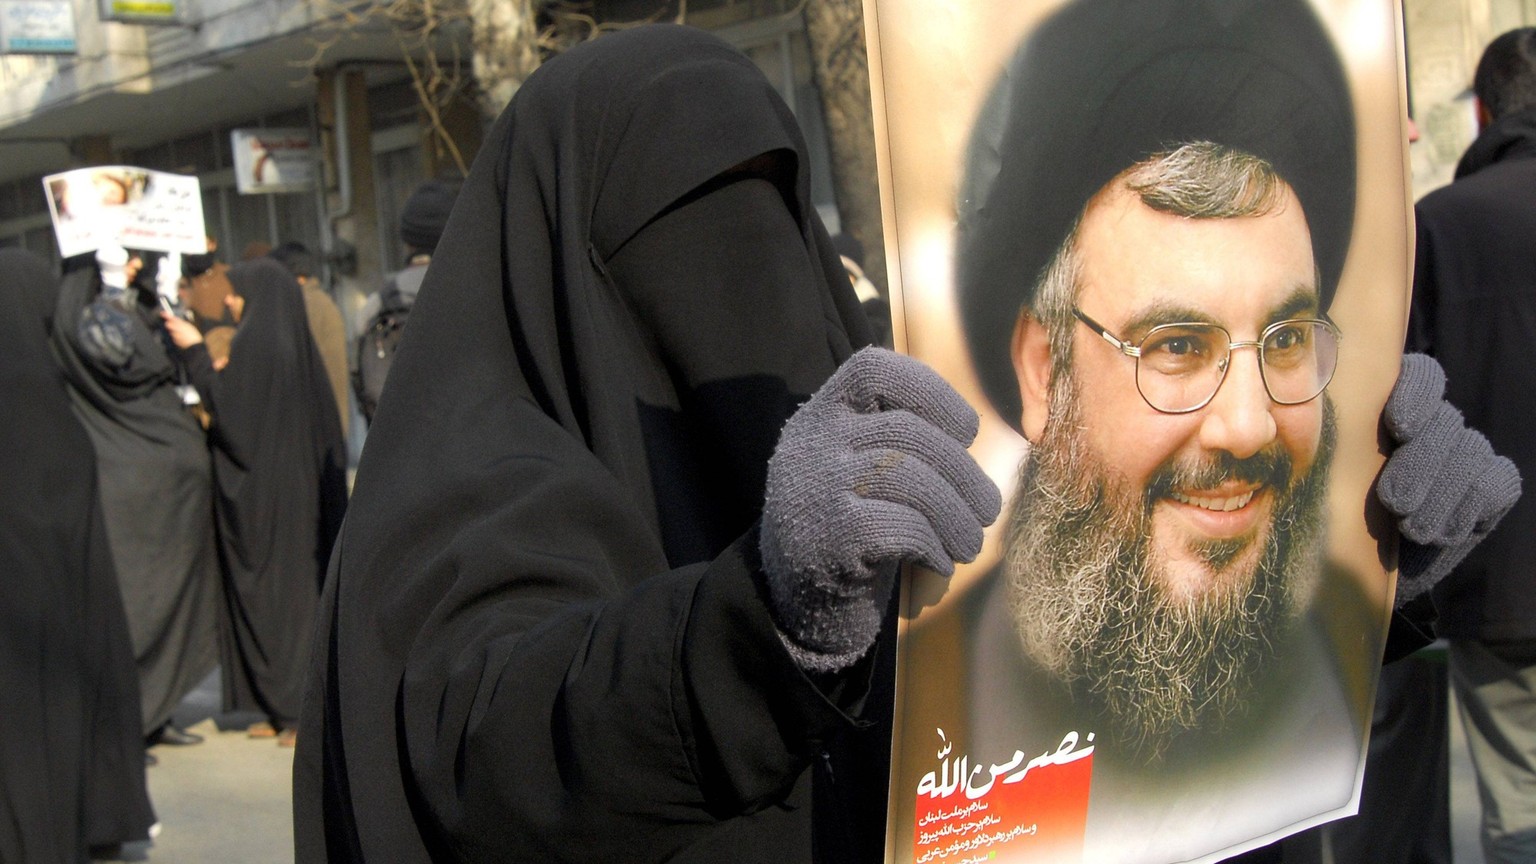 Jan 26, 2008 - Tehran, Iran - An Iranian female protestor holds up a picture of Lebanese Hezbollah leader Sheik Hassan Nasrallah, during an anti-Israel demonstration in support of Palestinians, in Teh ...